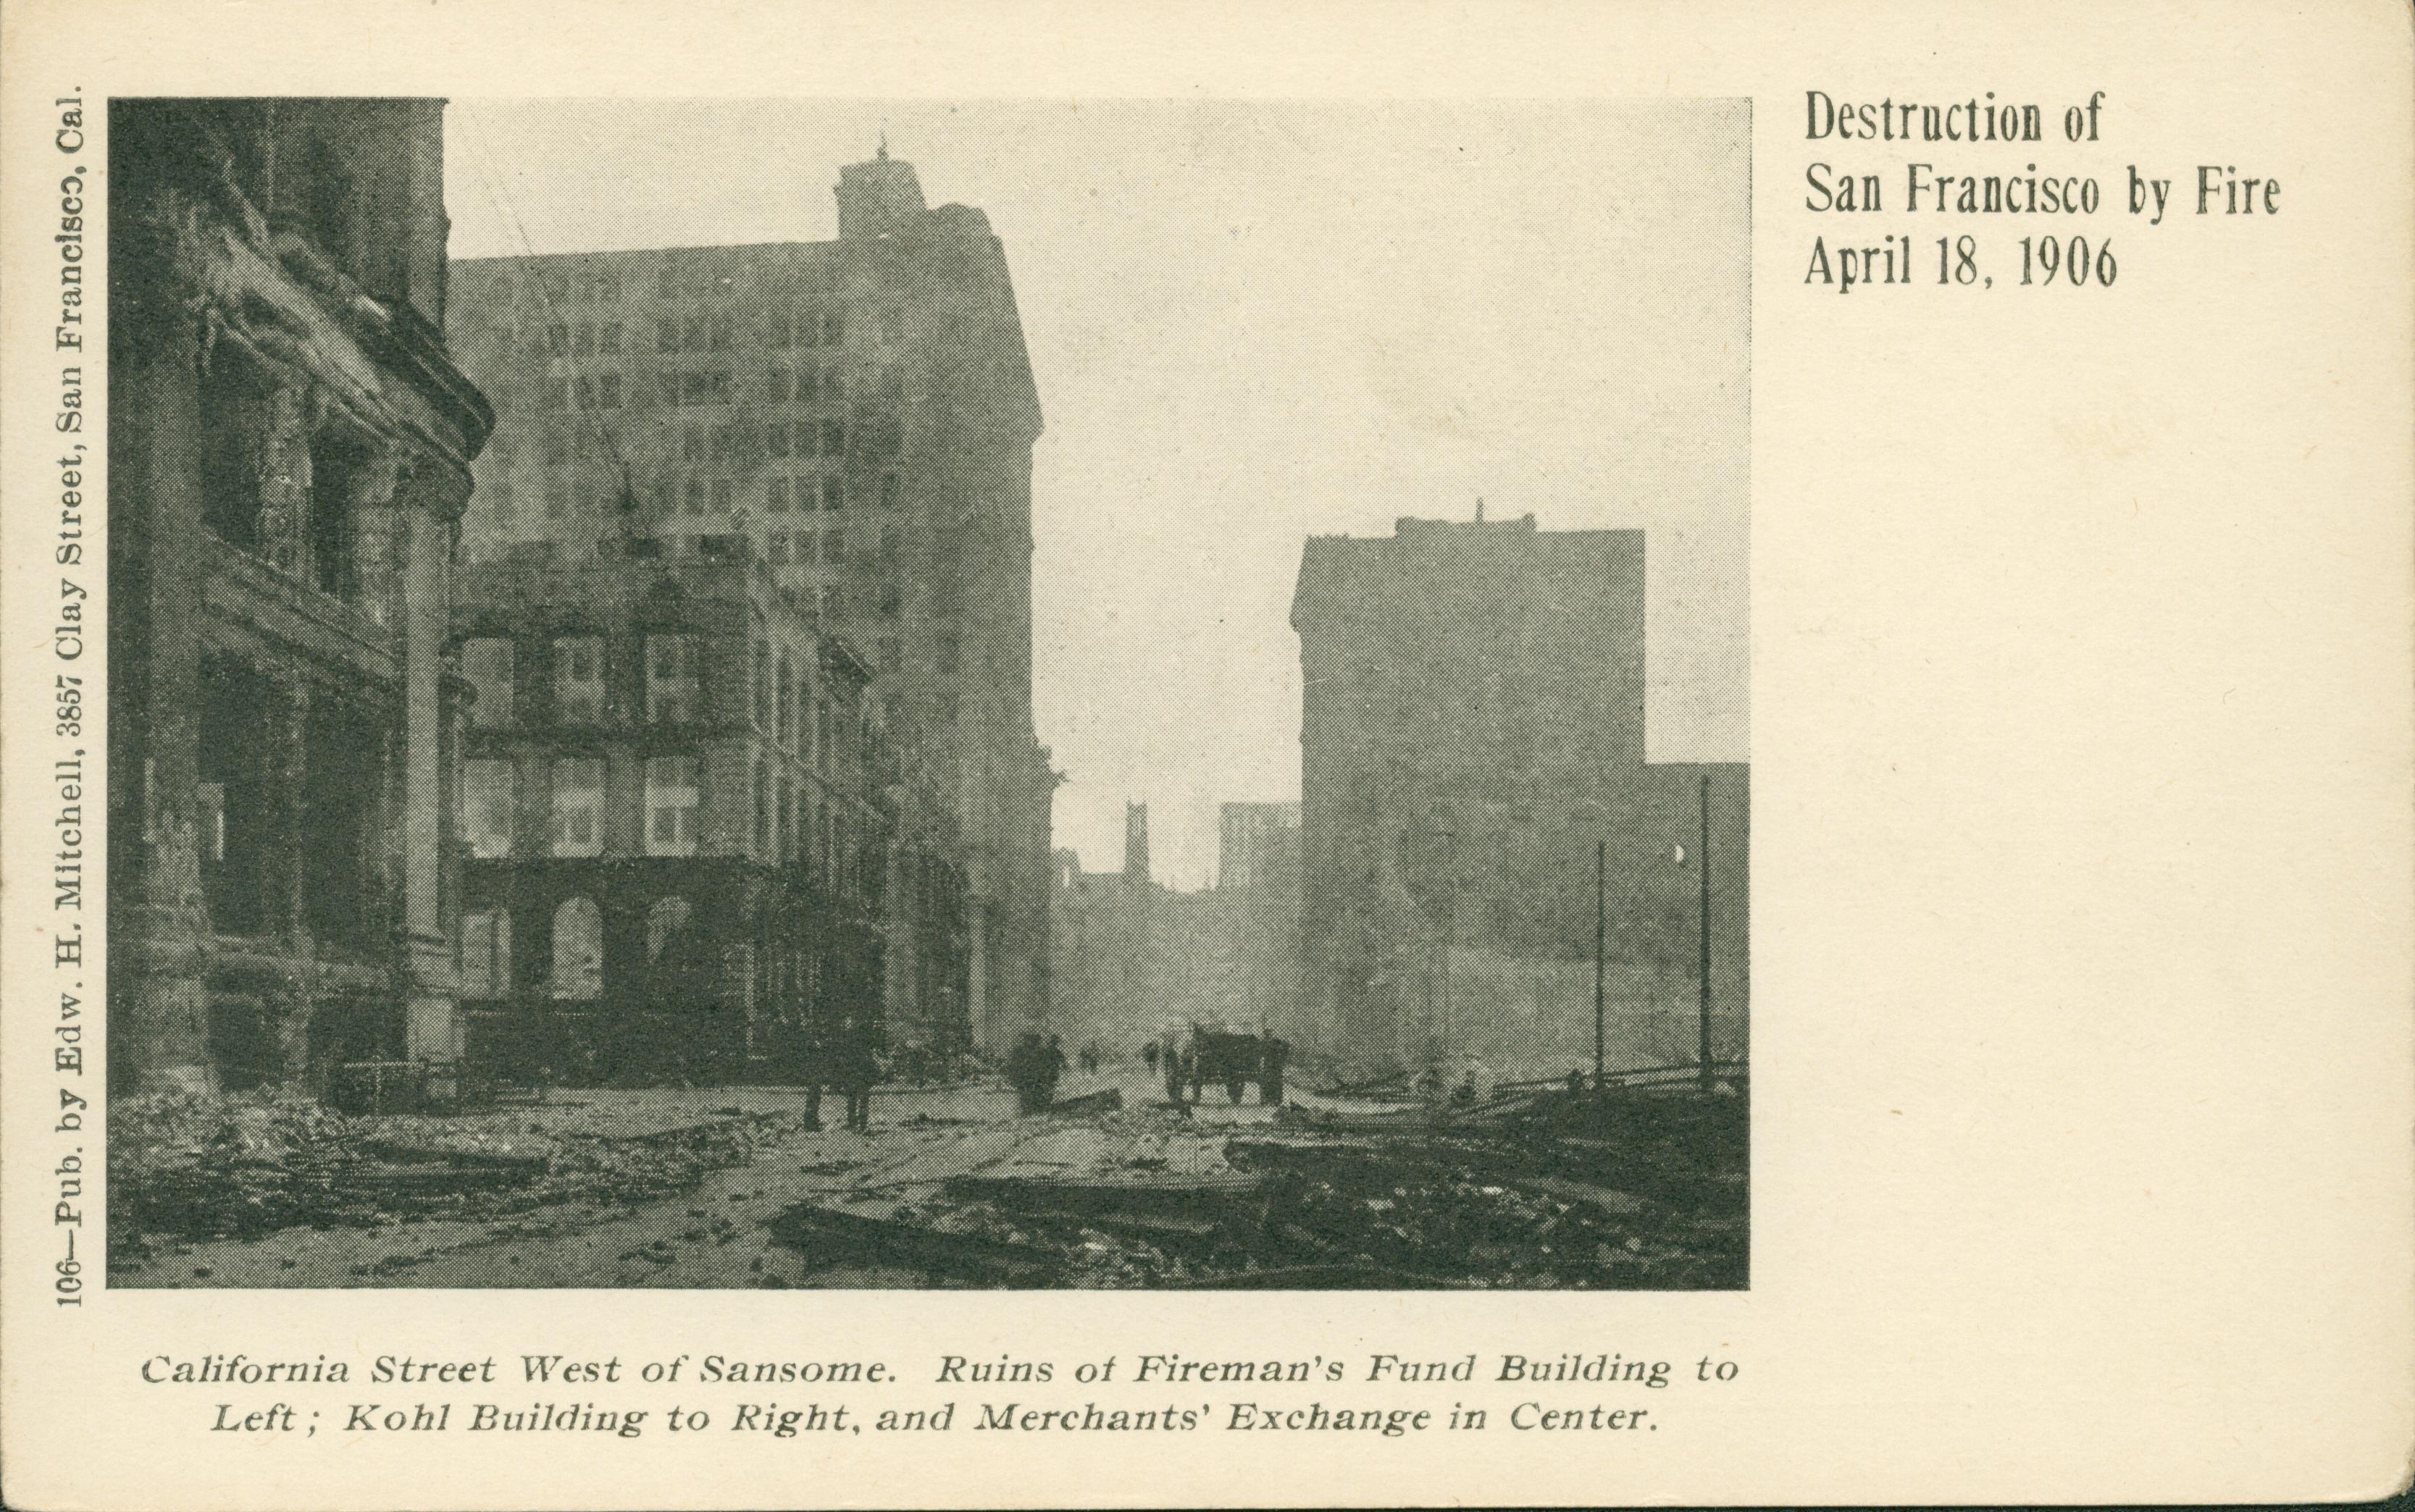 Photo showing the destruction to several prominent buildings along California Street.